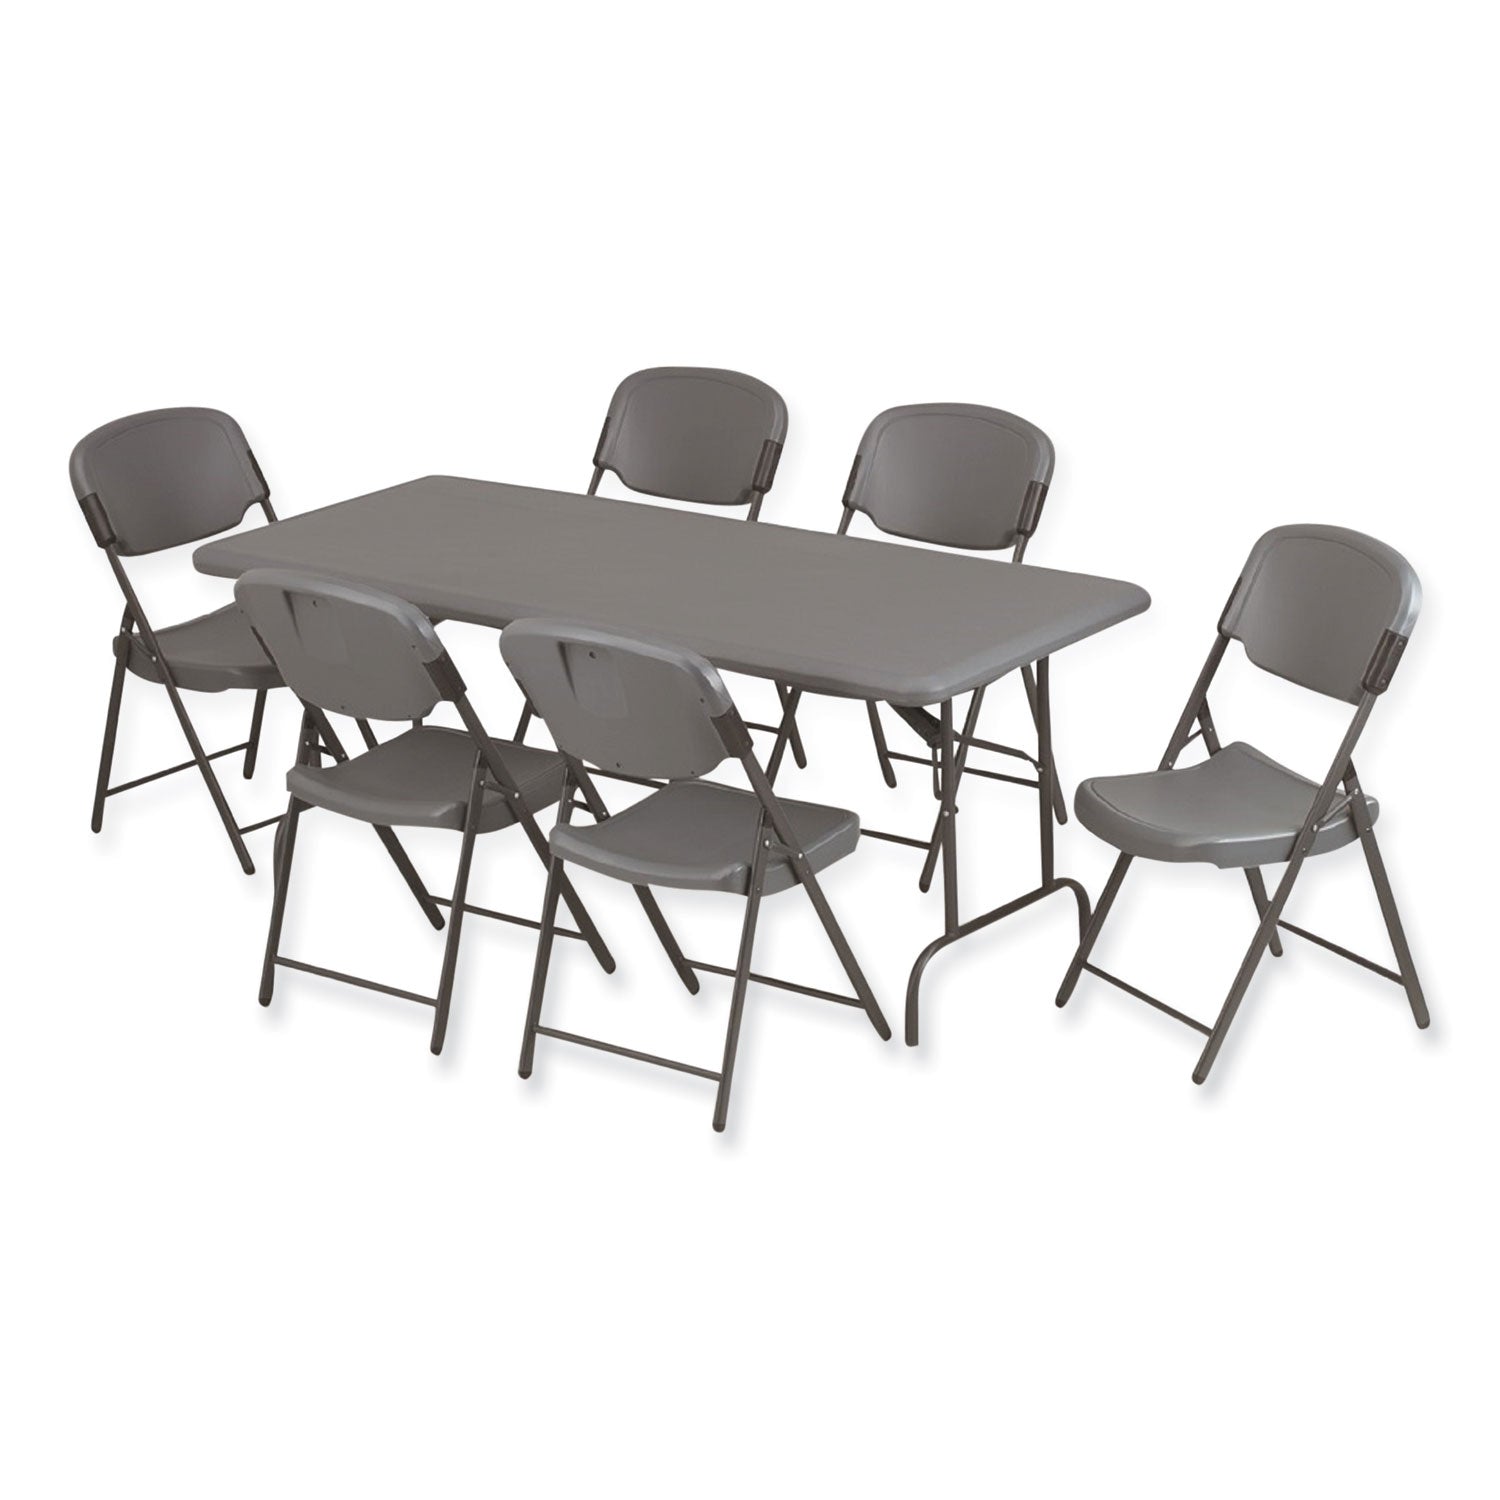 rough-n-ready-commercial-folding-chair-supports-up-to-350-lb-18-seat-height-charcoal-seat-back-charcoal-base-4-pack_ice64037 - 2